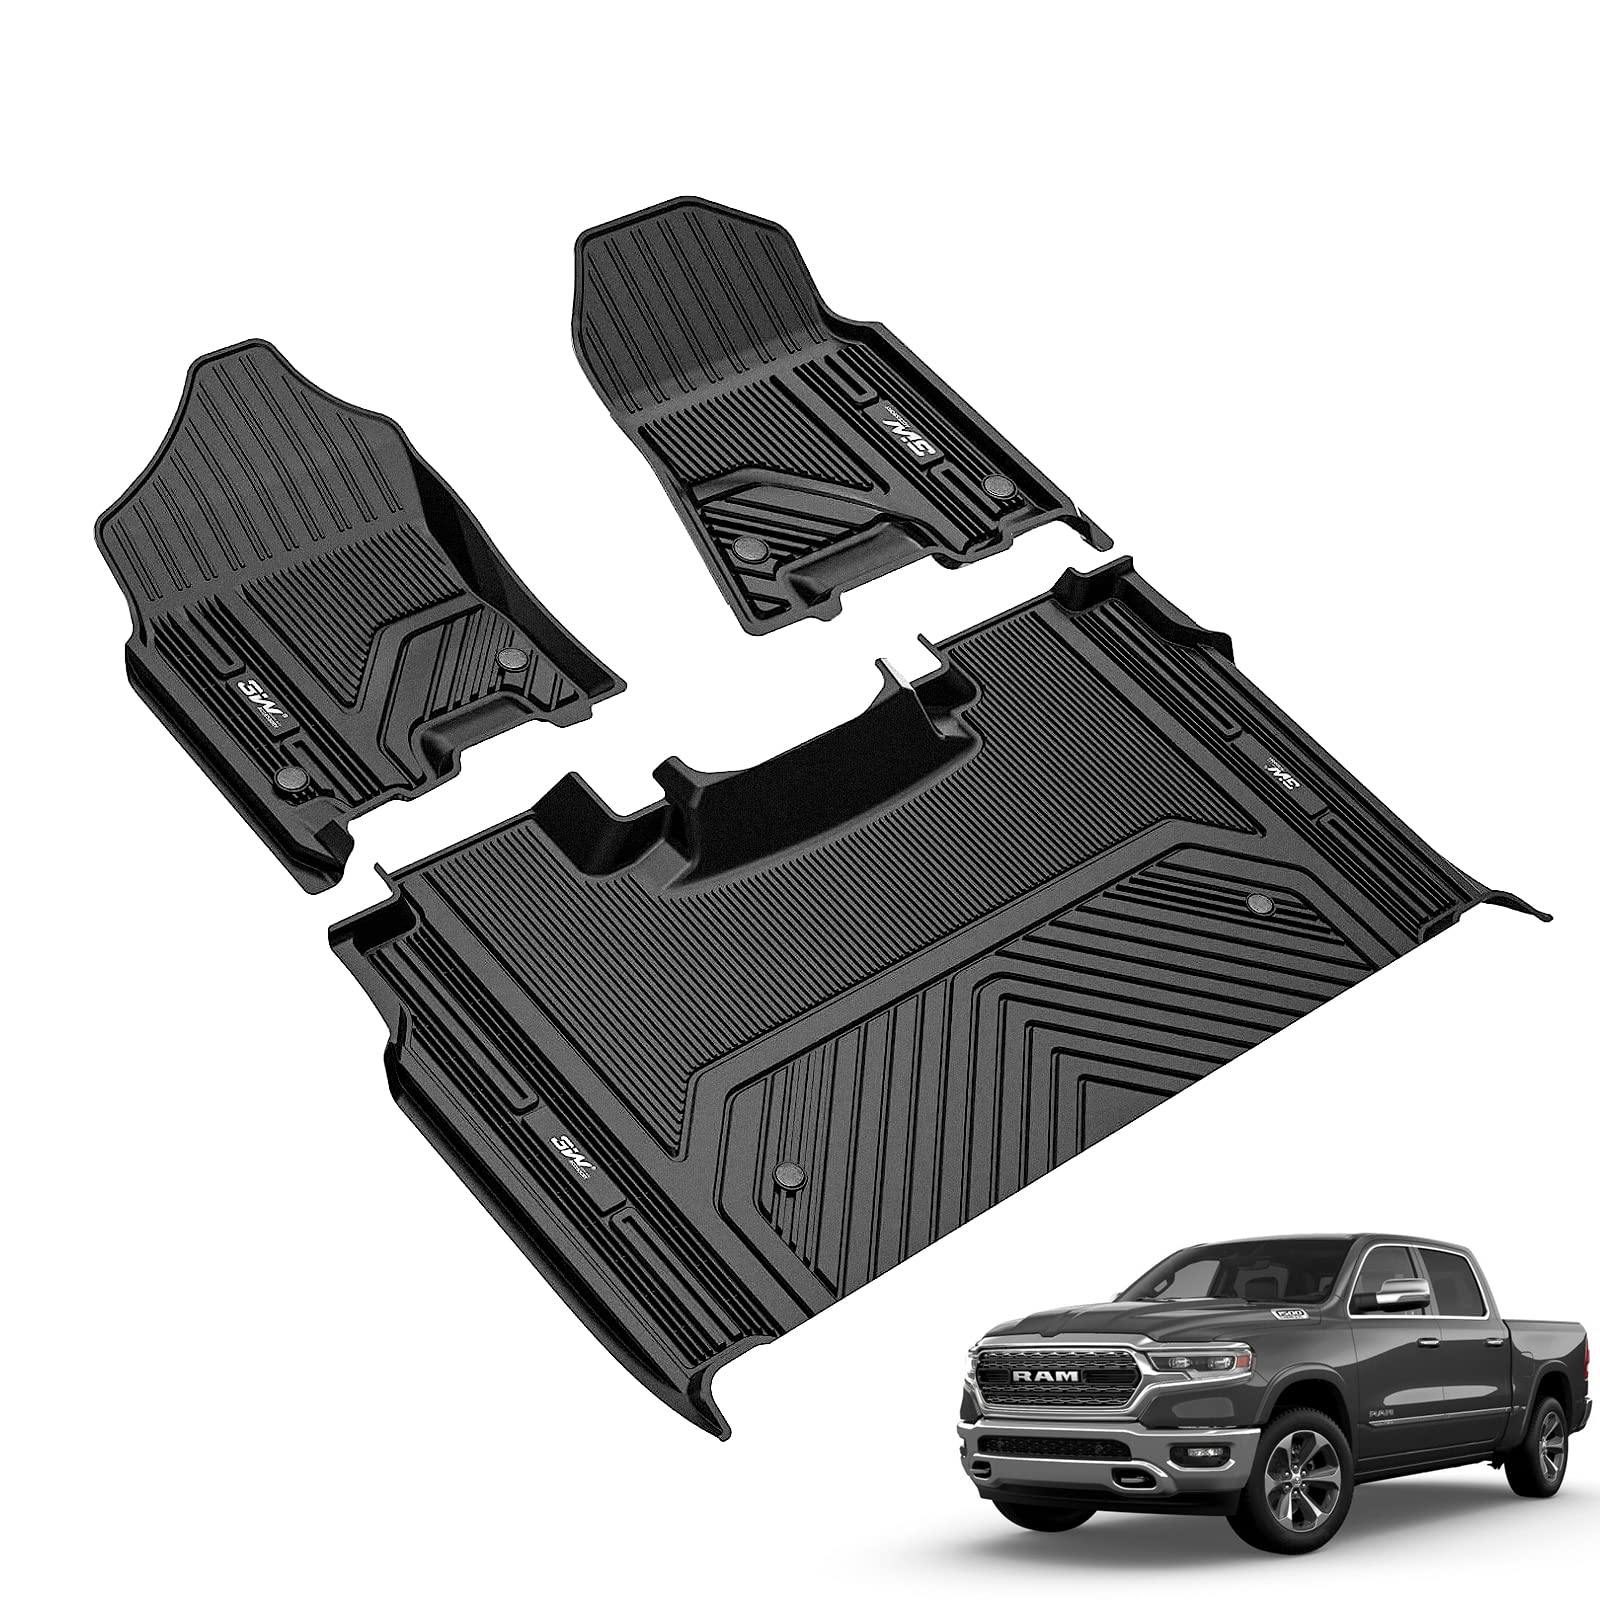 3W Dodge Ram 1500 2019-2024 New Body (NOT Classic Models) Custom Floor Mats TPE Material & All-Weather Protection Vehicles & Parts 3W 2019-2024 With Underseat Storage 1st&2nd Row Mats